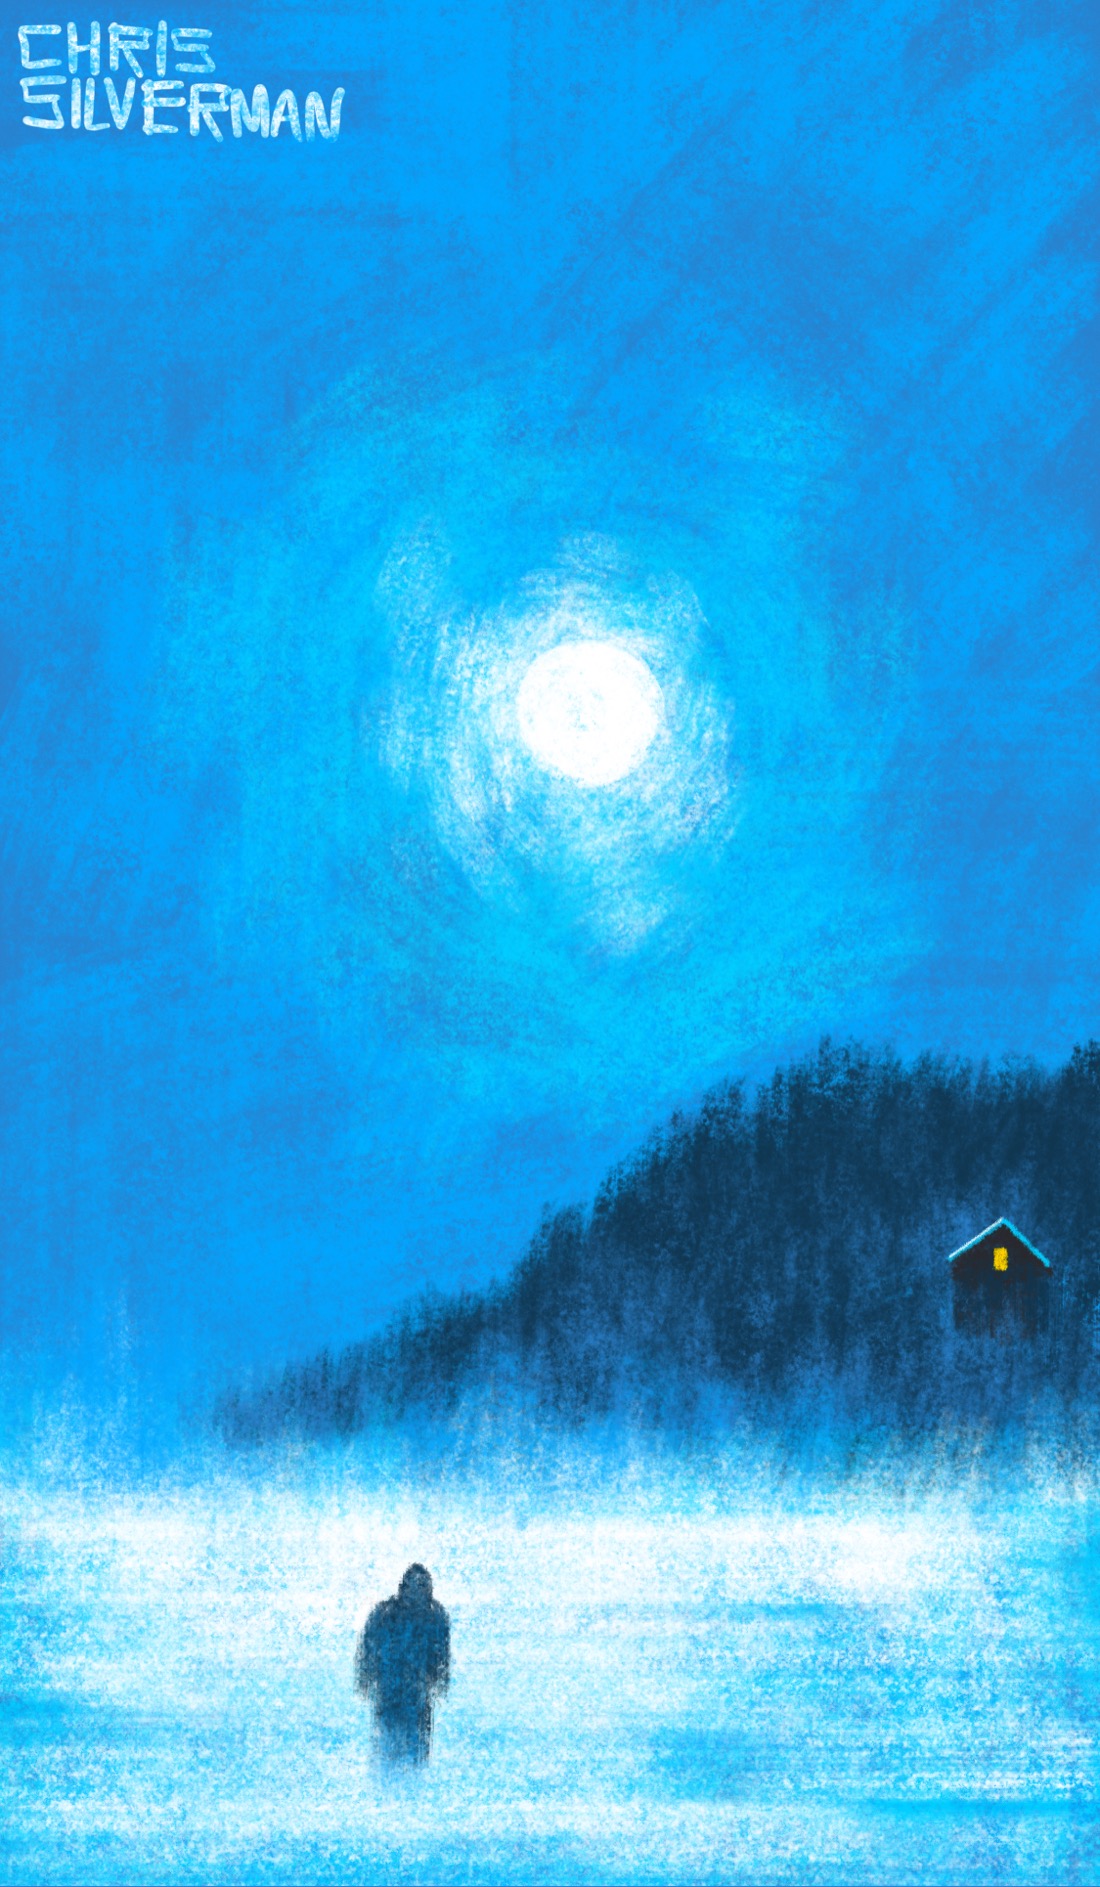 A clear, cold night. The full moon blazes across a frozen lake with what appears to be fog on the surface. In the foreground, walking across the ice, is a hooded figure. On the far shore is a wooded hill with a single house on the side. There is a yellow window glowing on the side of the house. This is a mostly blue drawing: the sky is blue, in the way that it is when there's a full moon, and the ice is a lighter but cold blue.